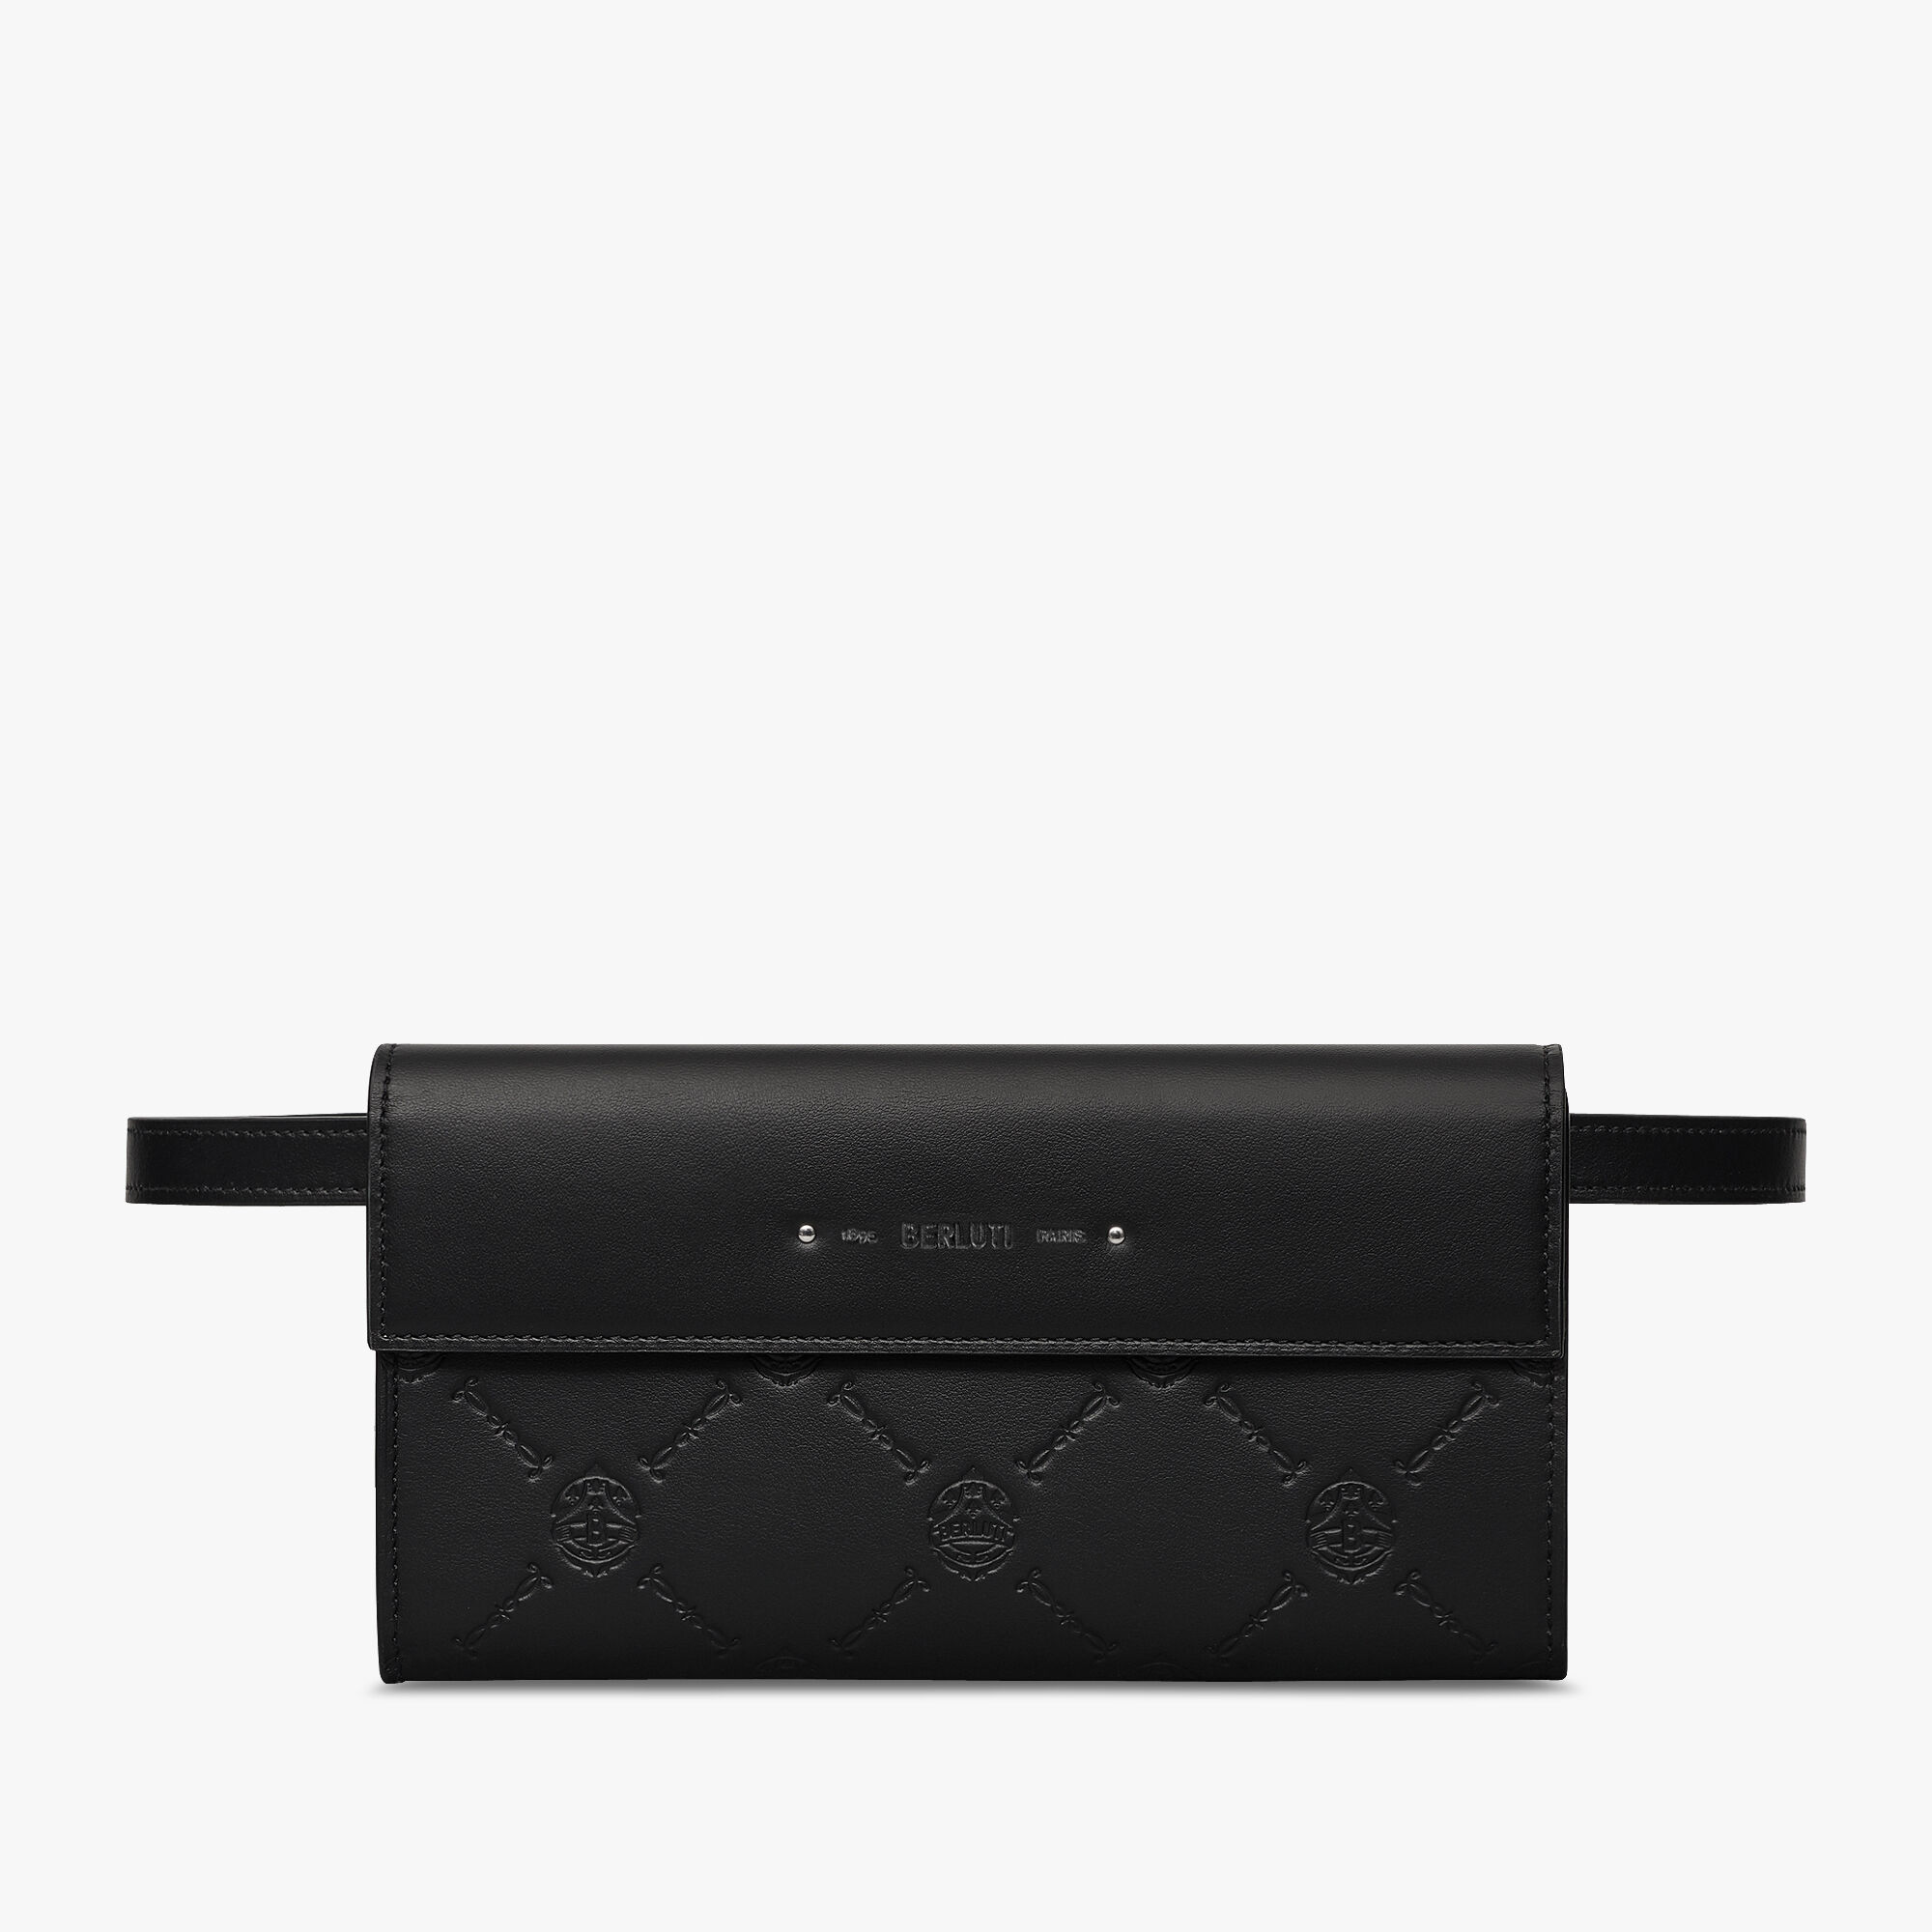 Clutch collections by Berluti - US